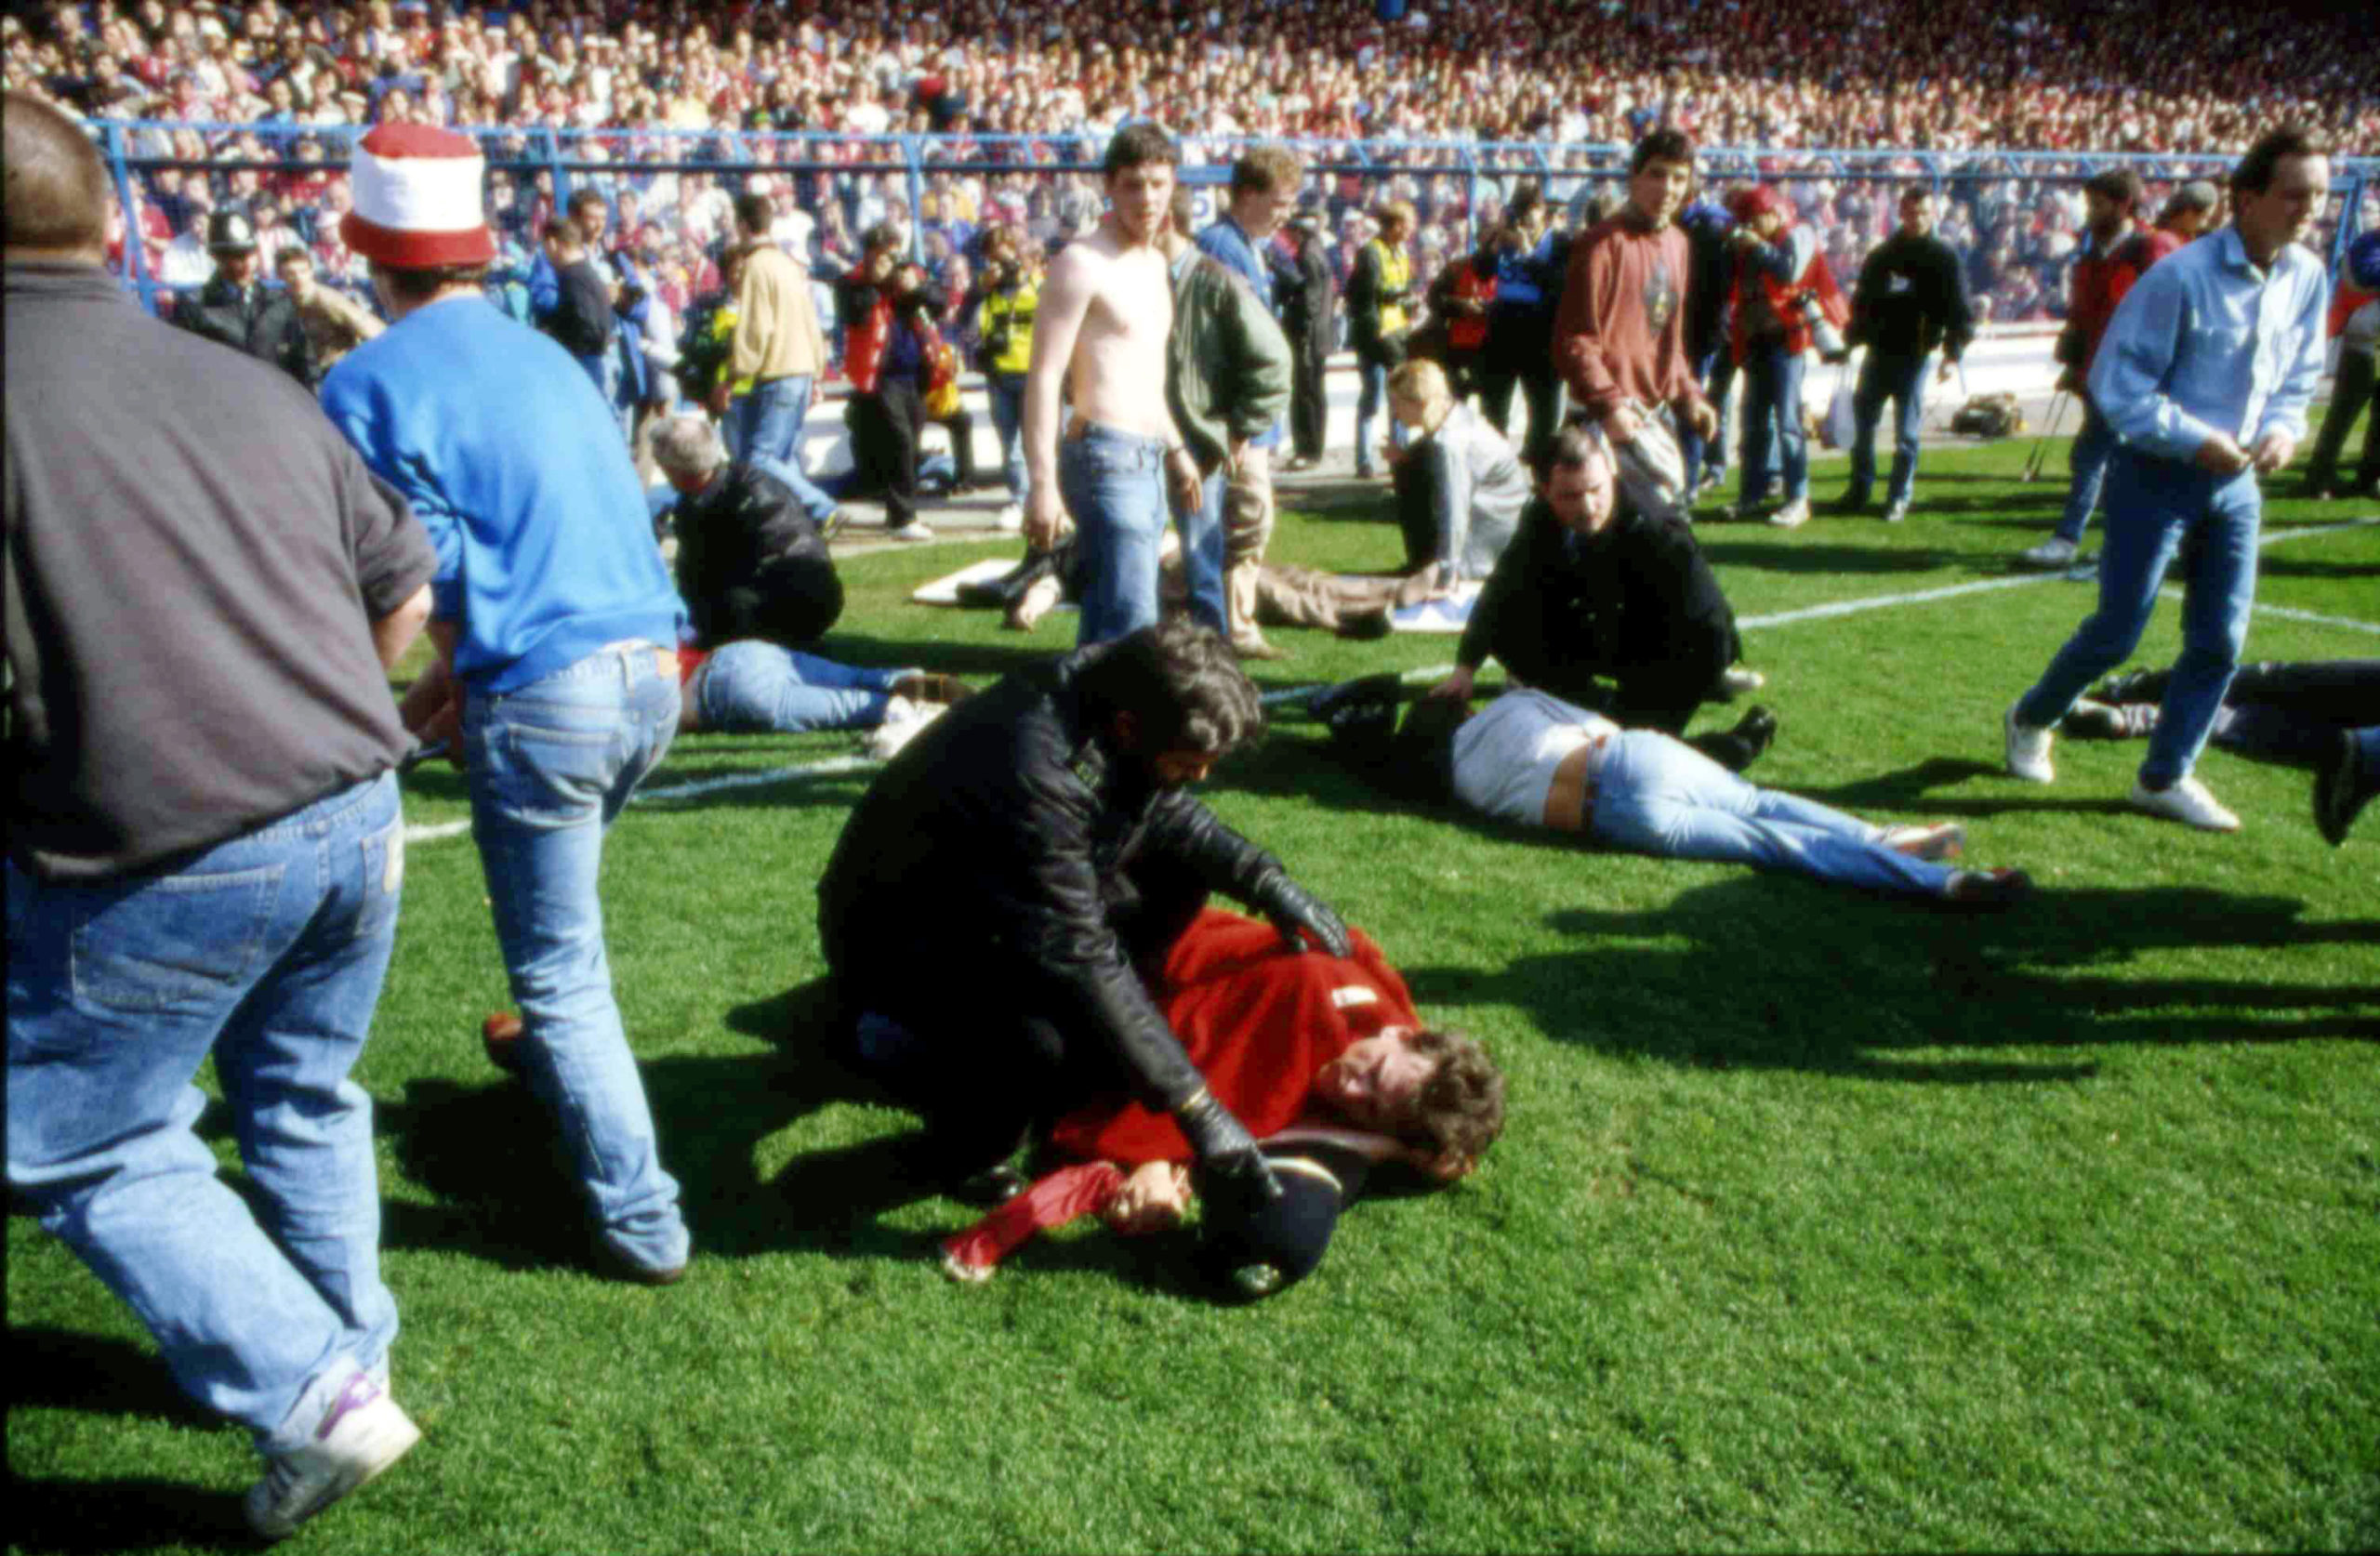 Stewards and supporters tend and care for wounded supporters on the field at Hillsborough Stadium, in Sheffield, England, on April 15, 1989.